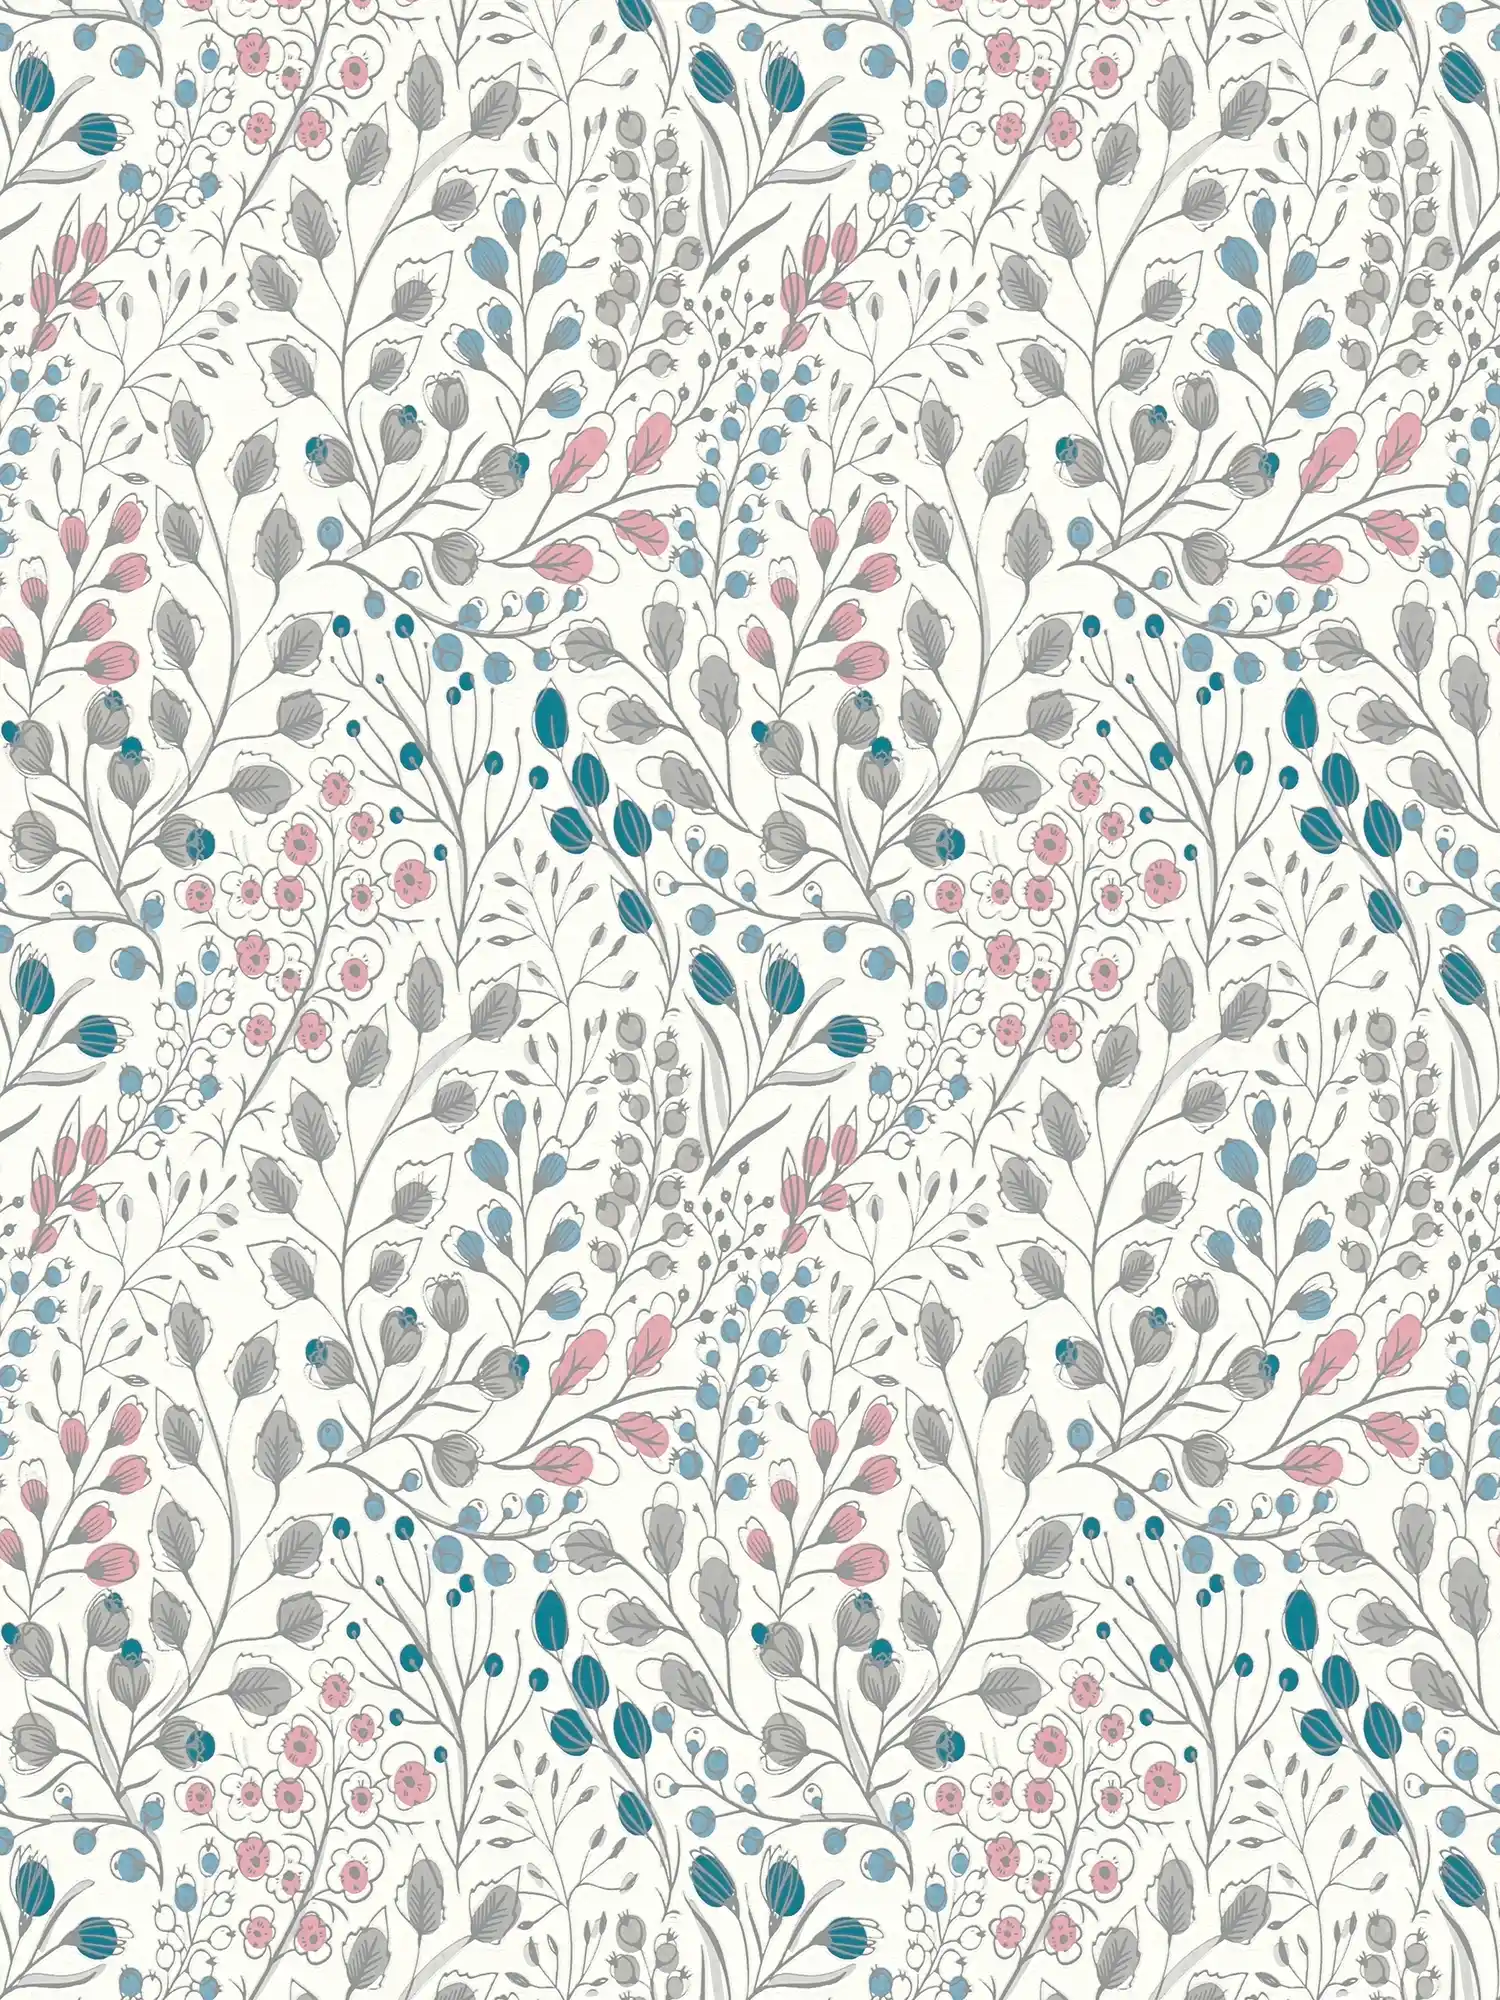 Non-woven wallpaper with floral pattern in drawing style - white, pink, blue
